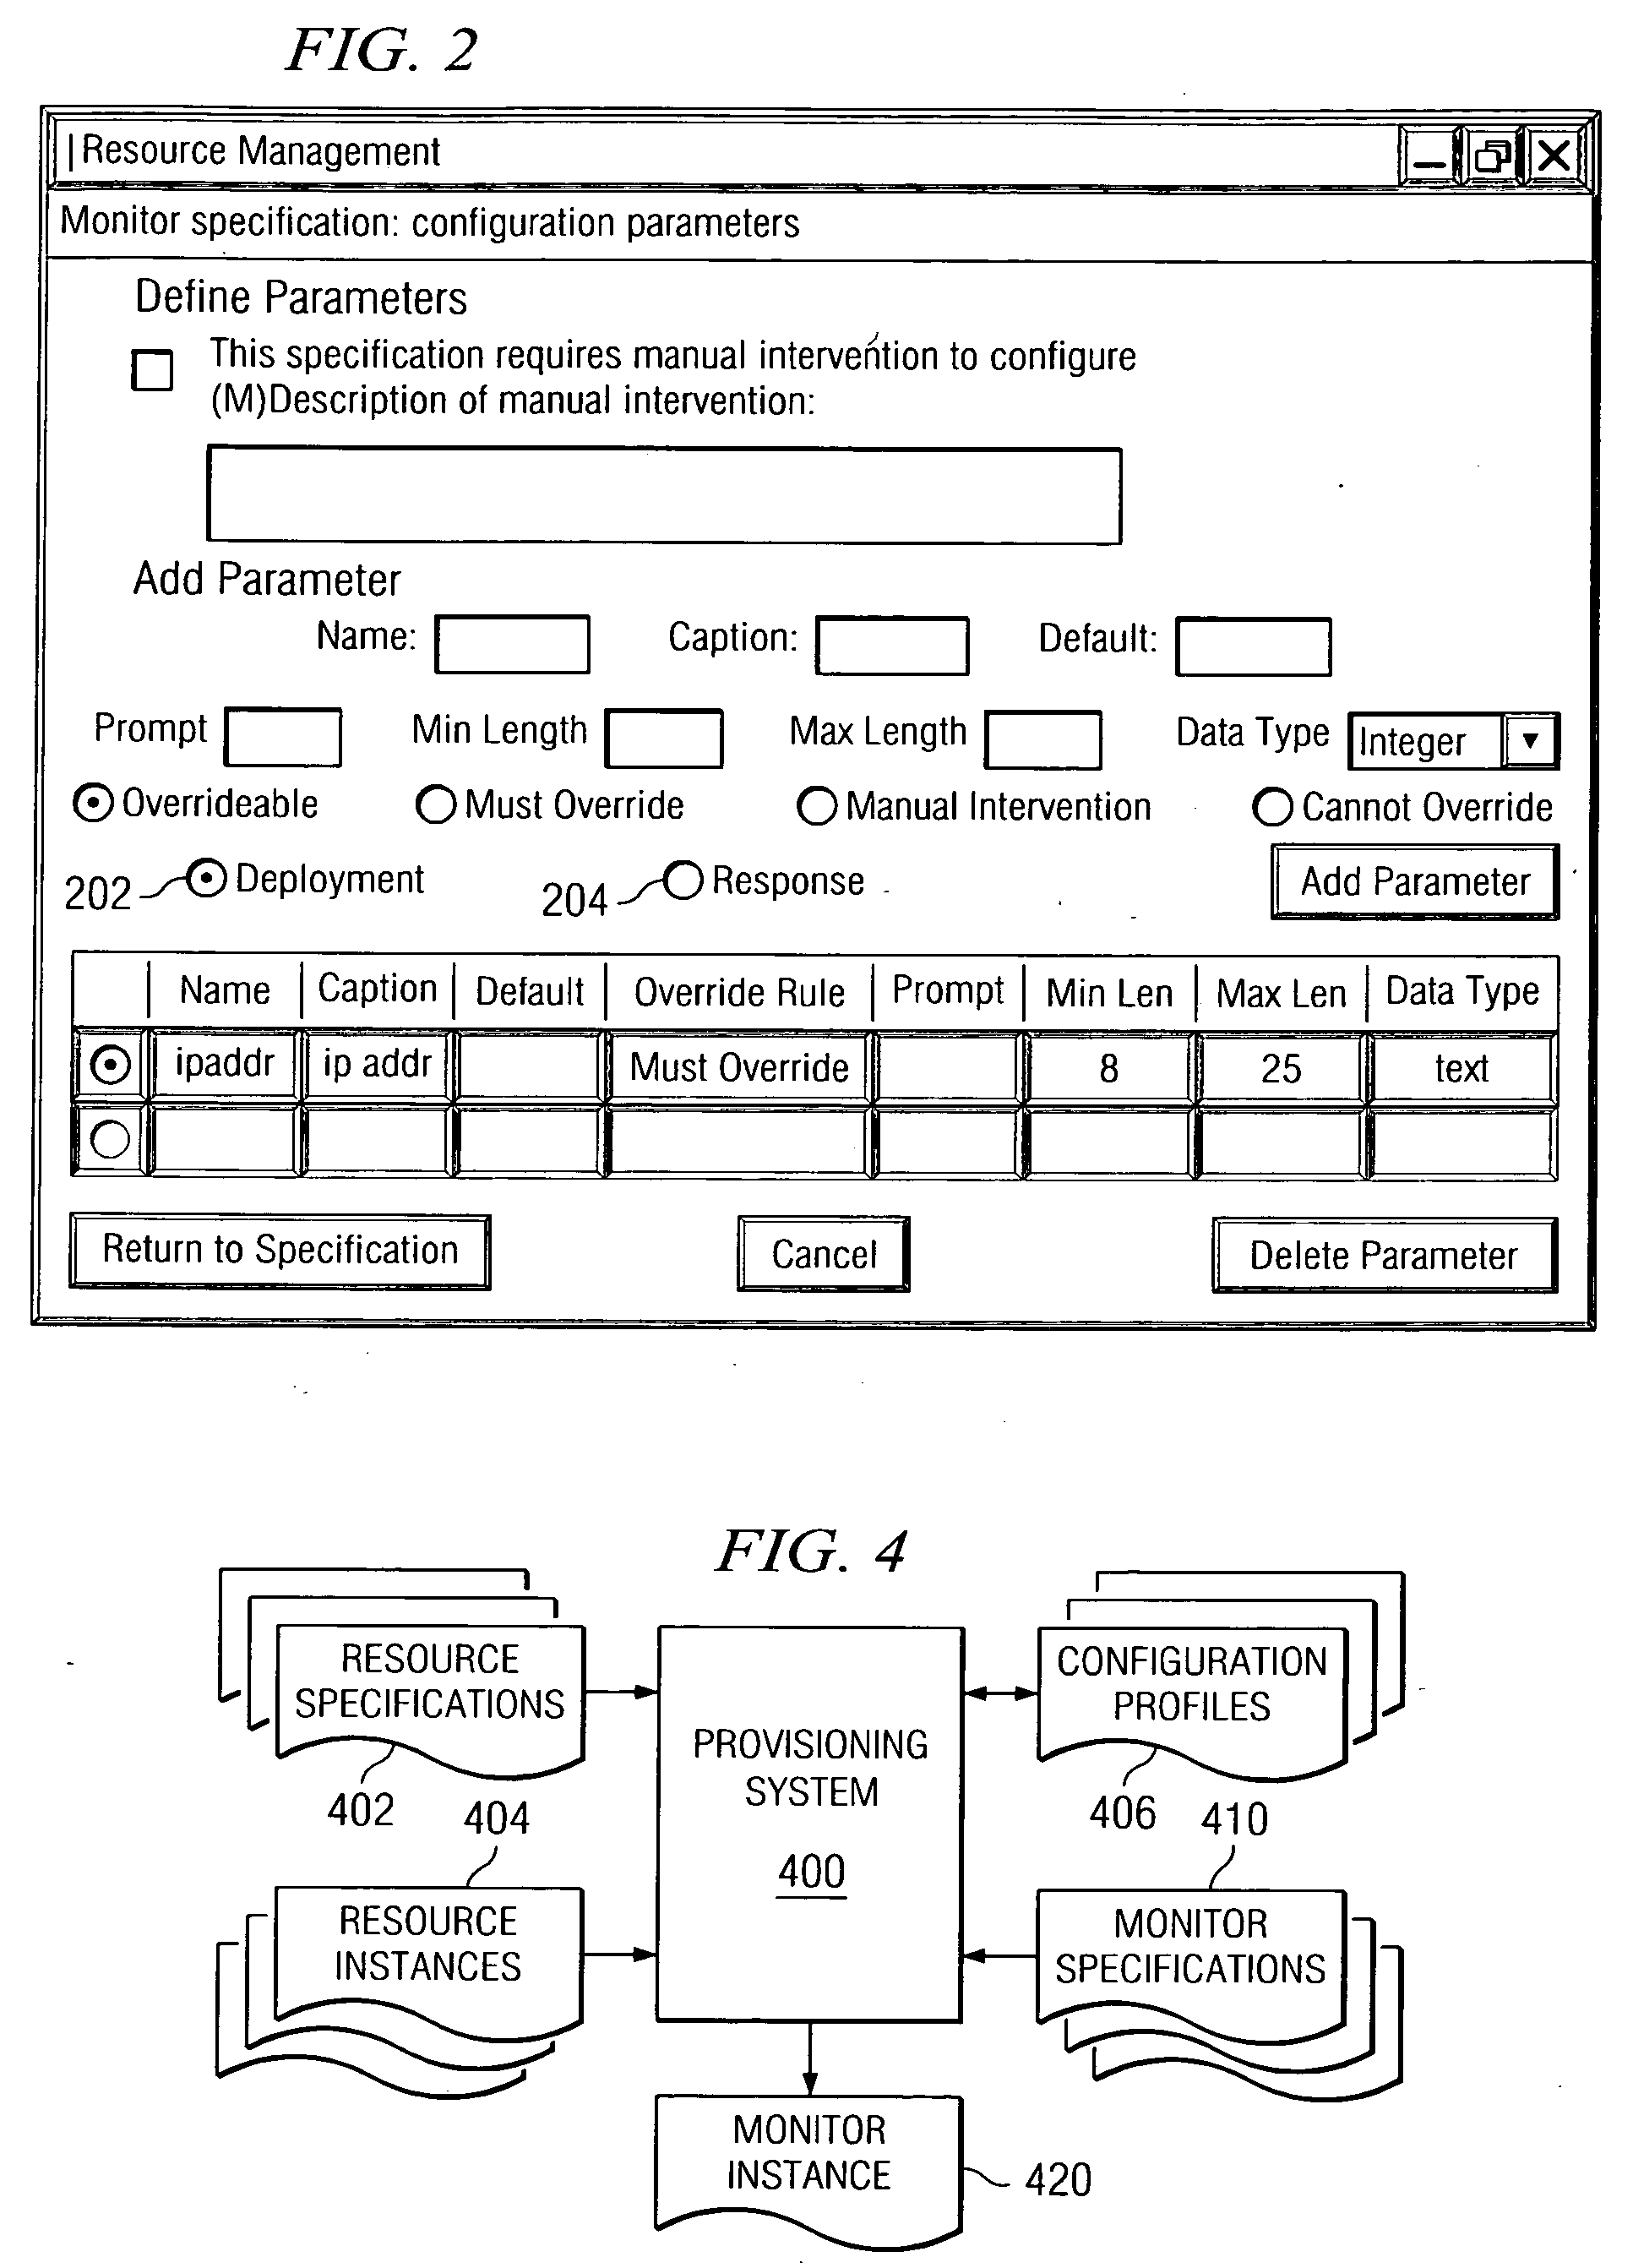 Generic method for resource monitoring configuration in provisioning systems